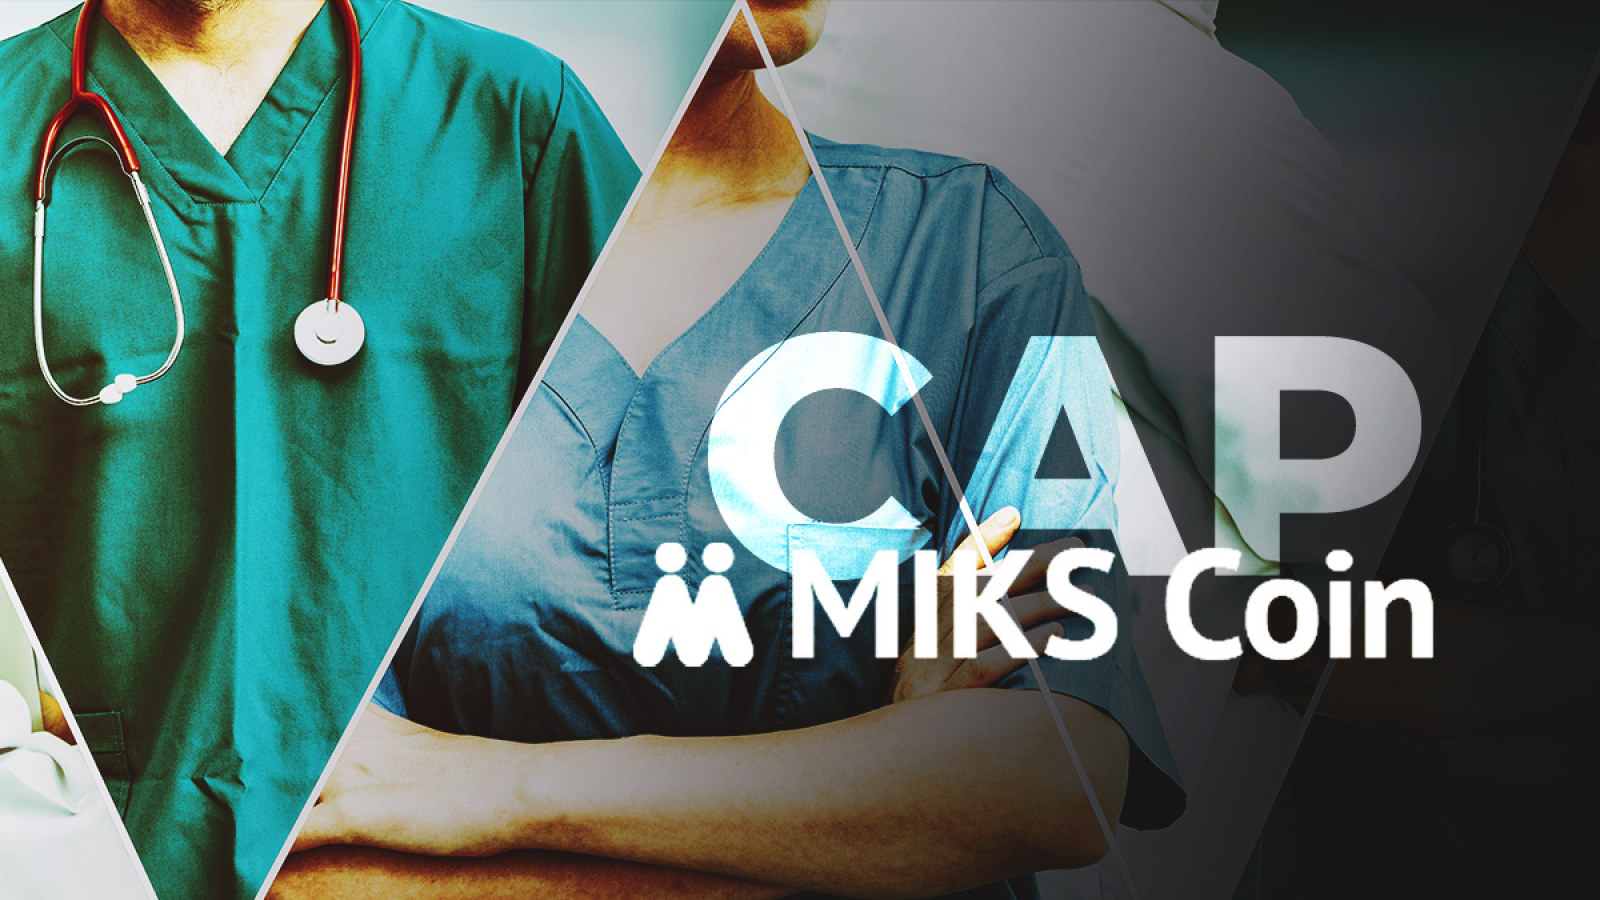 Mikscoin Project Will Assist CAP In Medical Field Expansion